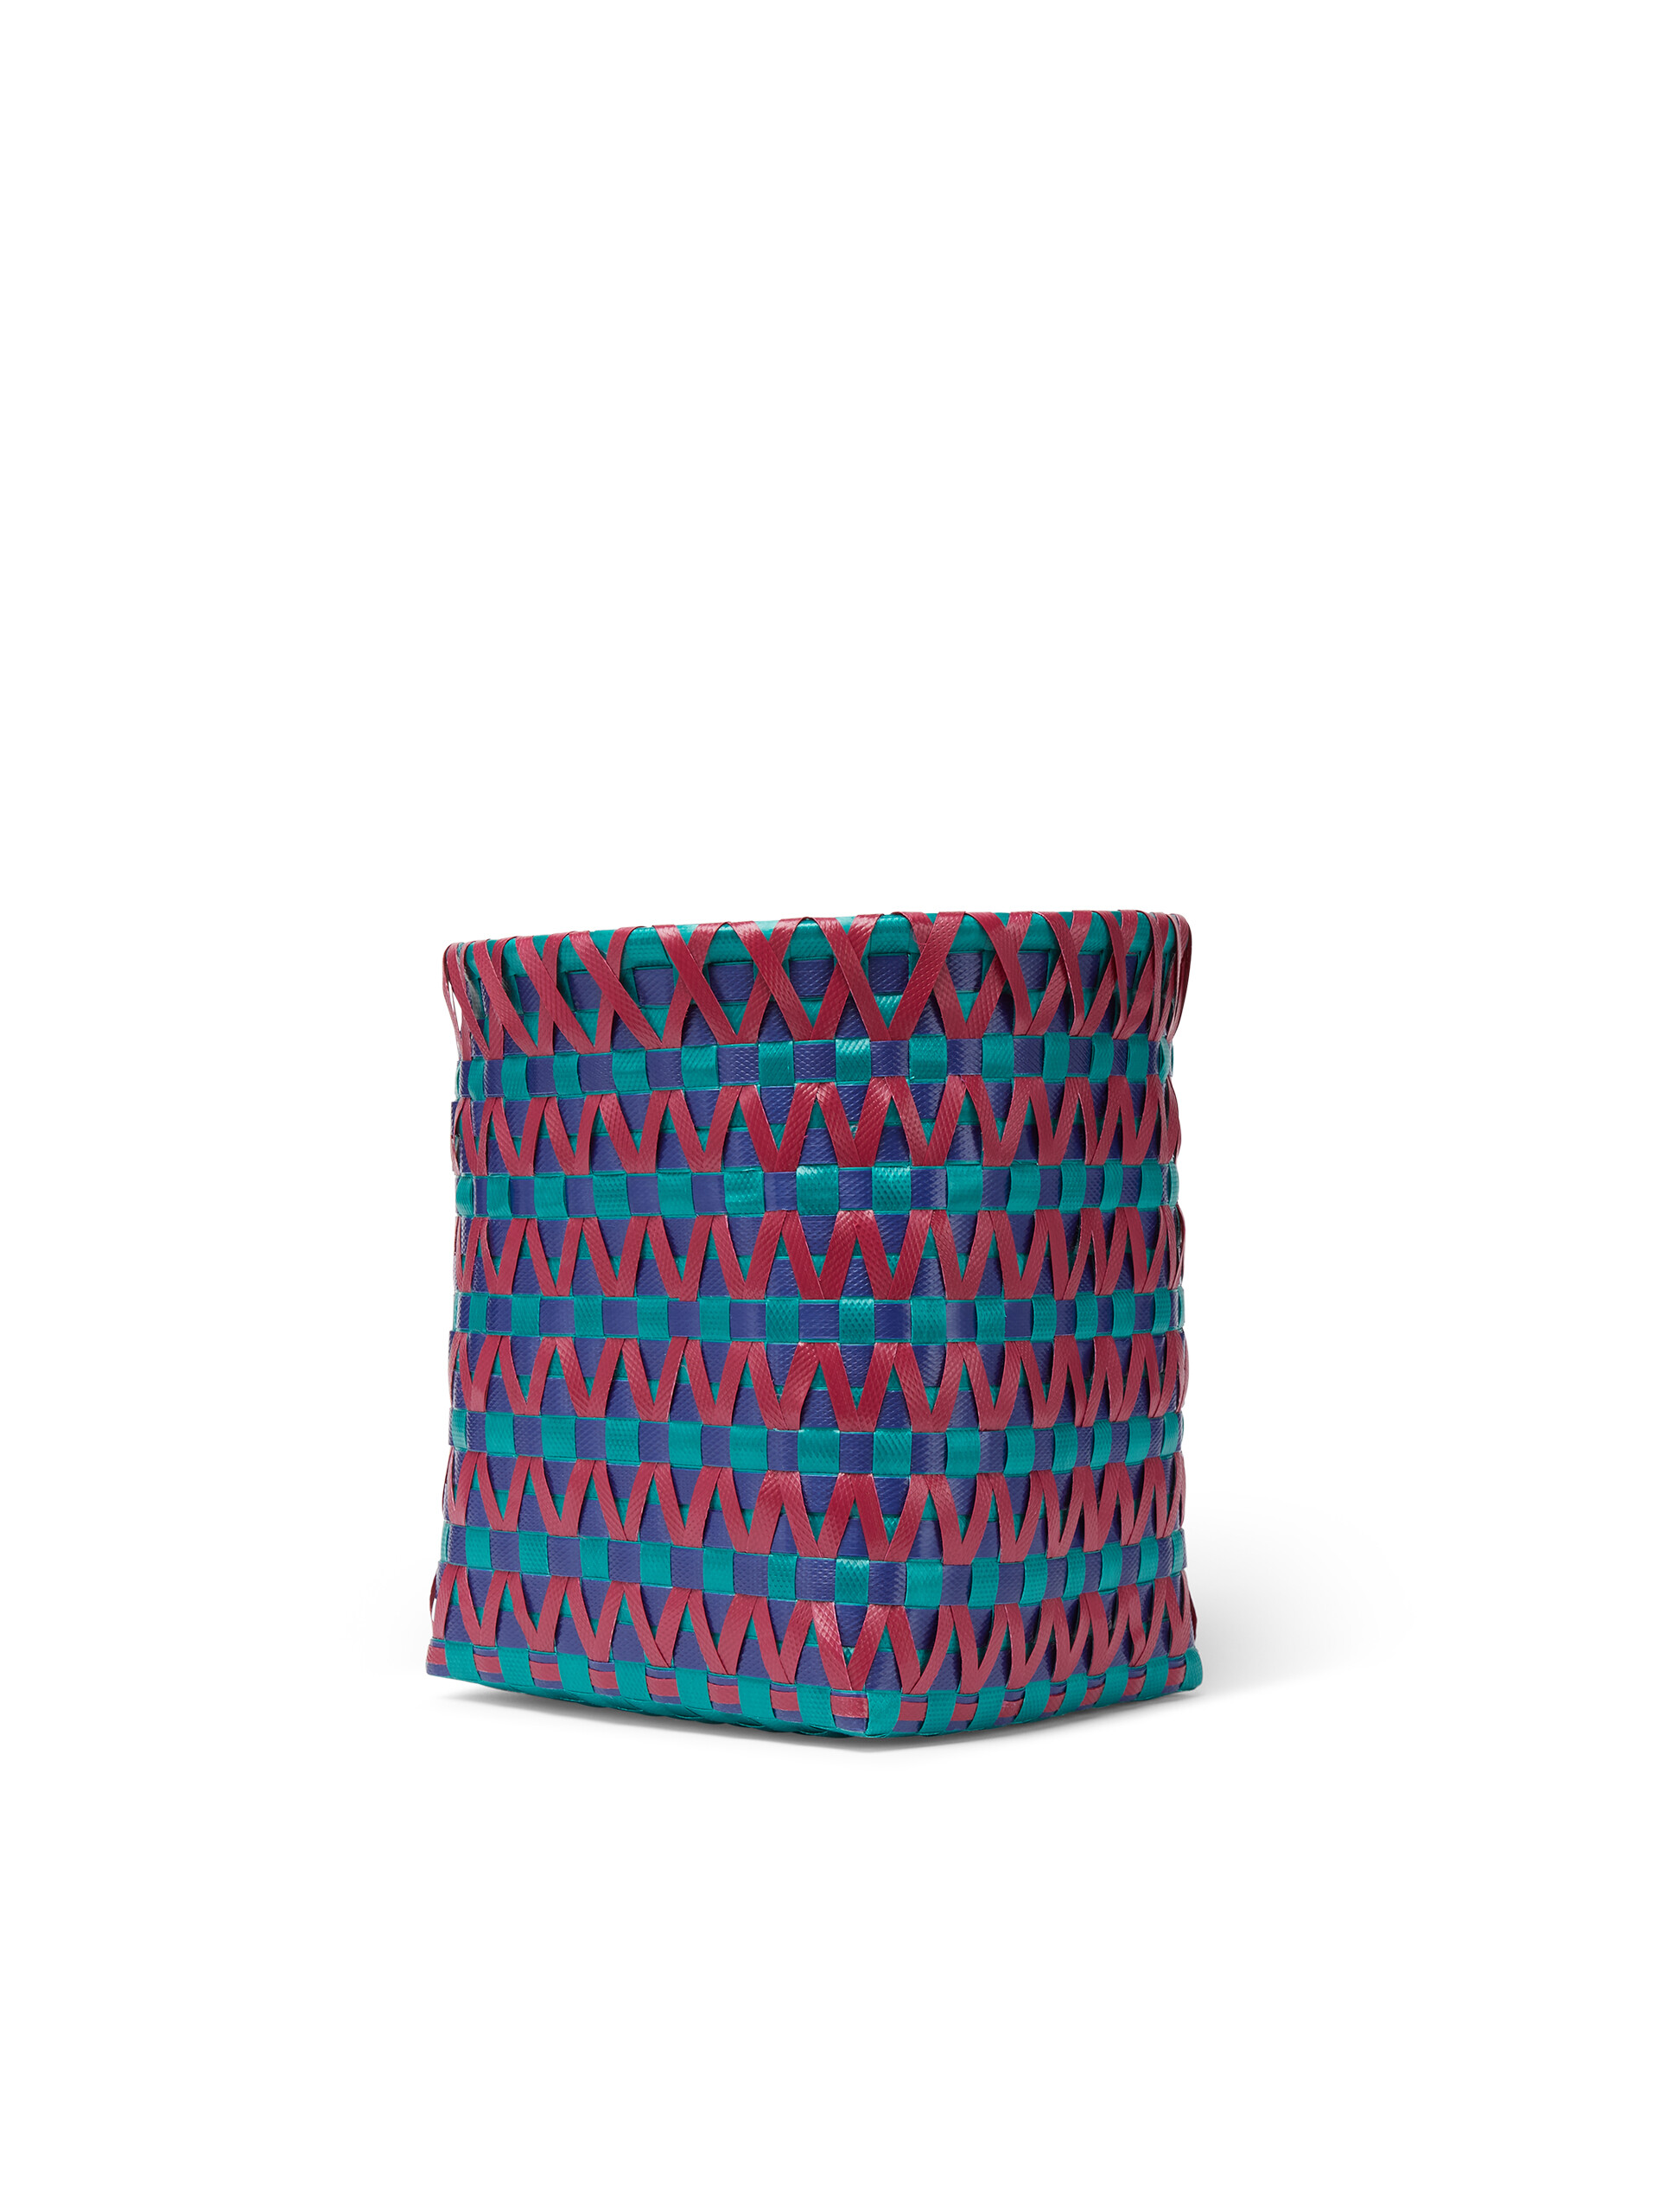 MARNI MARKET blue and burgundy woven basket - Accessories - Image 2